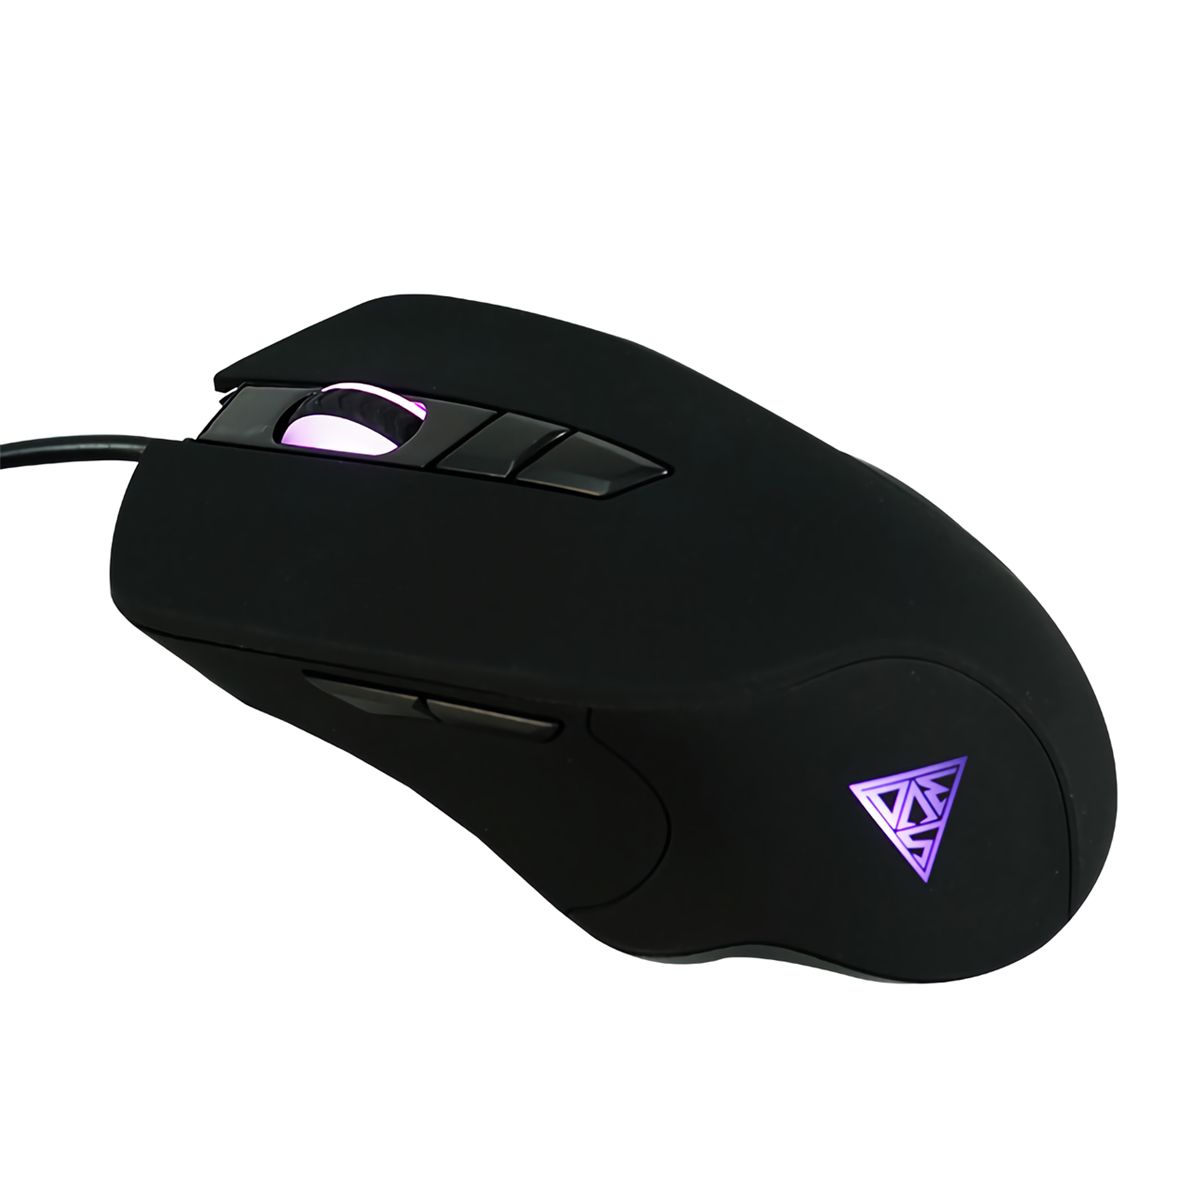 GAMEDIAS-M18-Wired-Optical-USB-Gaming-Mouse-4200DPI-RGB-Backlit-6-Buttons-Mouse-1662789